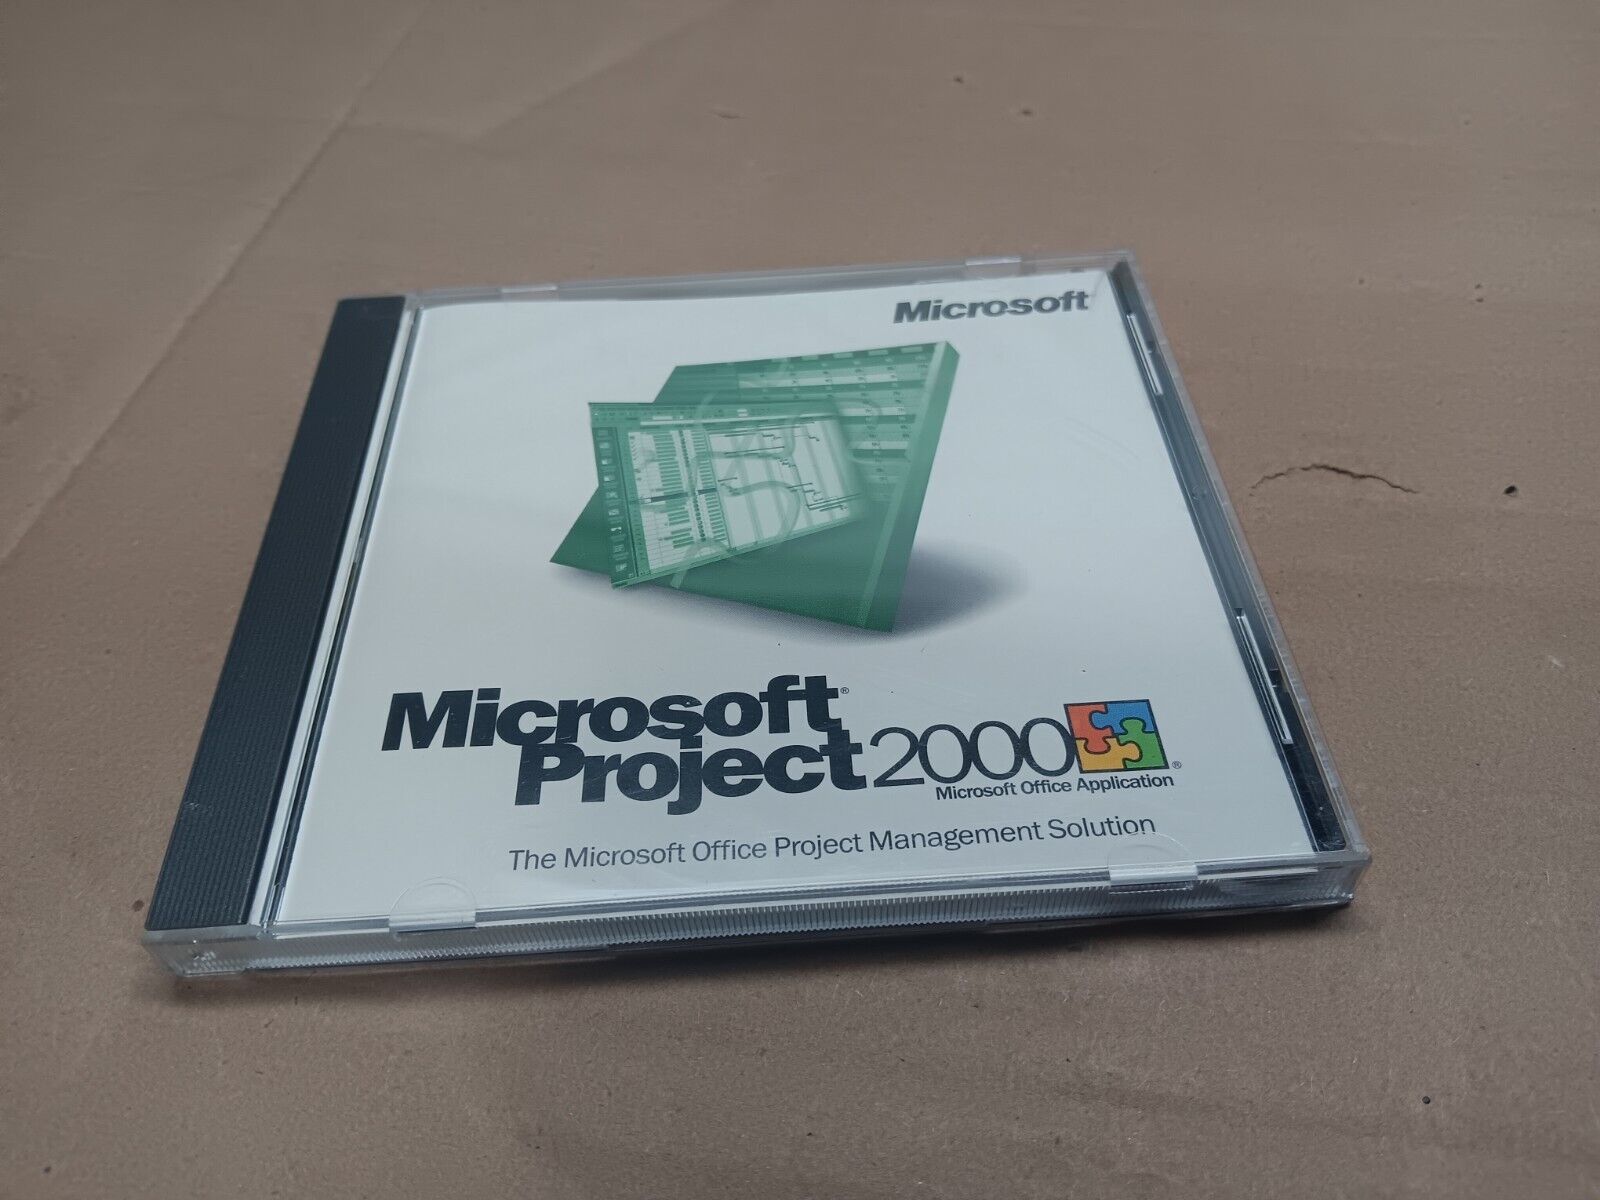 Vintage Microsoft Project 2000 with product cd key